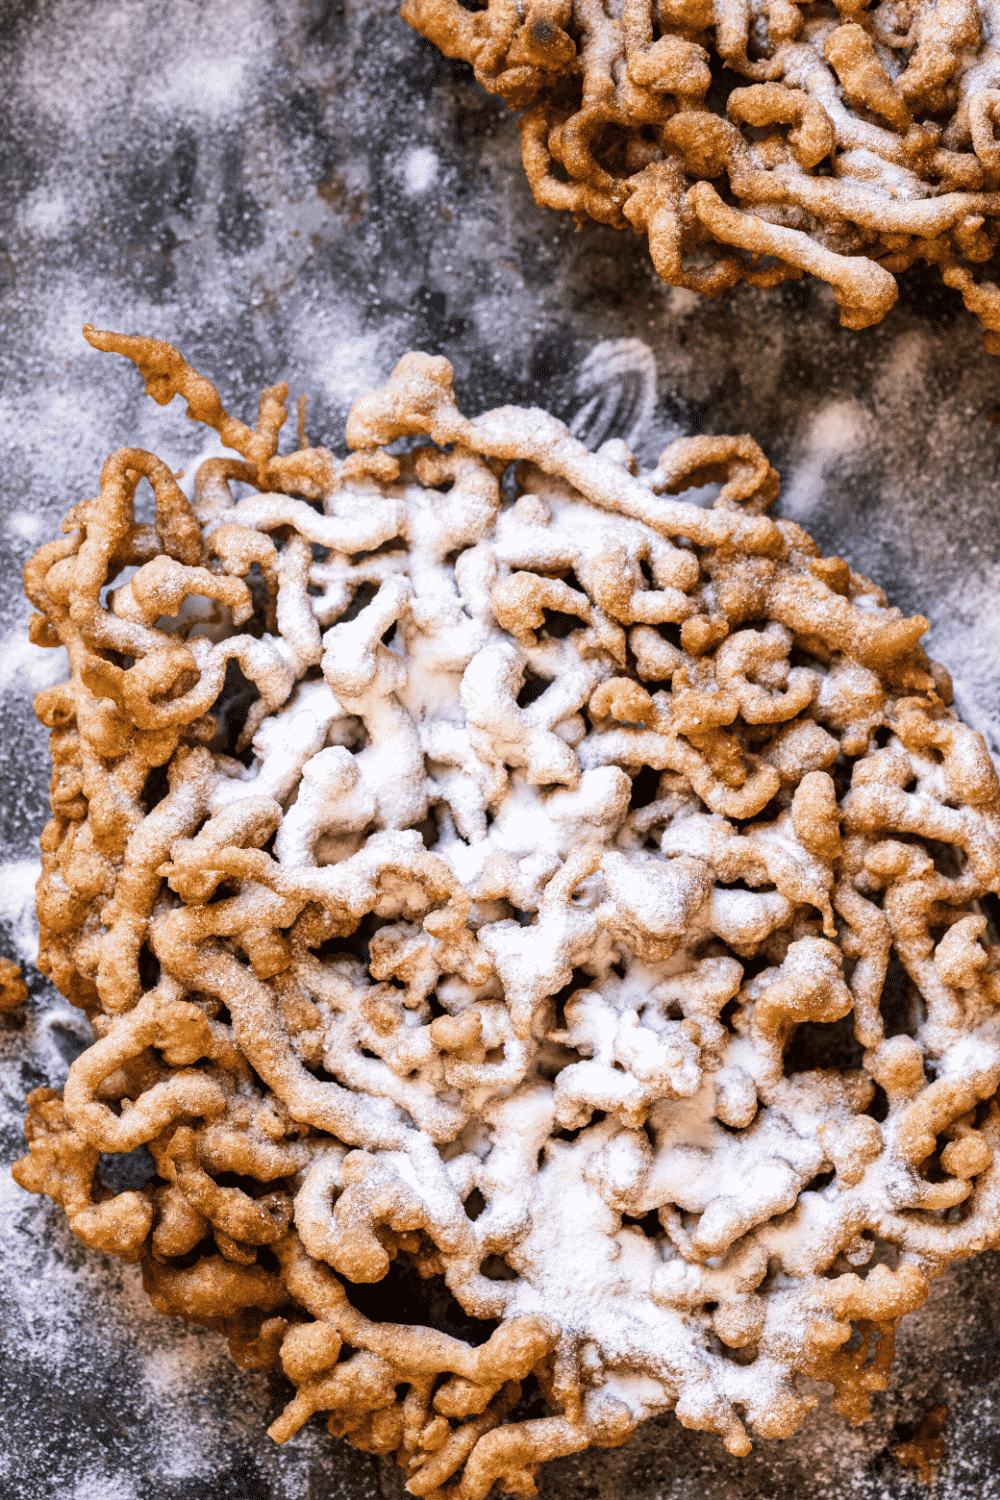 A funnel cake on black table. The table is covered in powdered sugar.